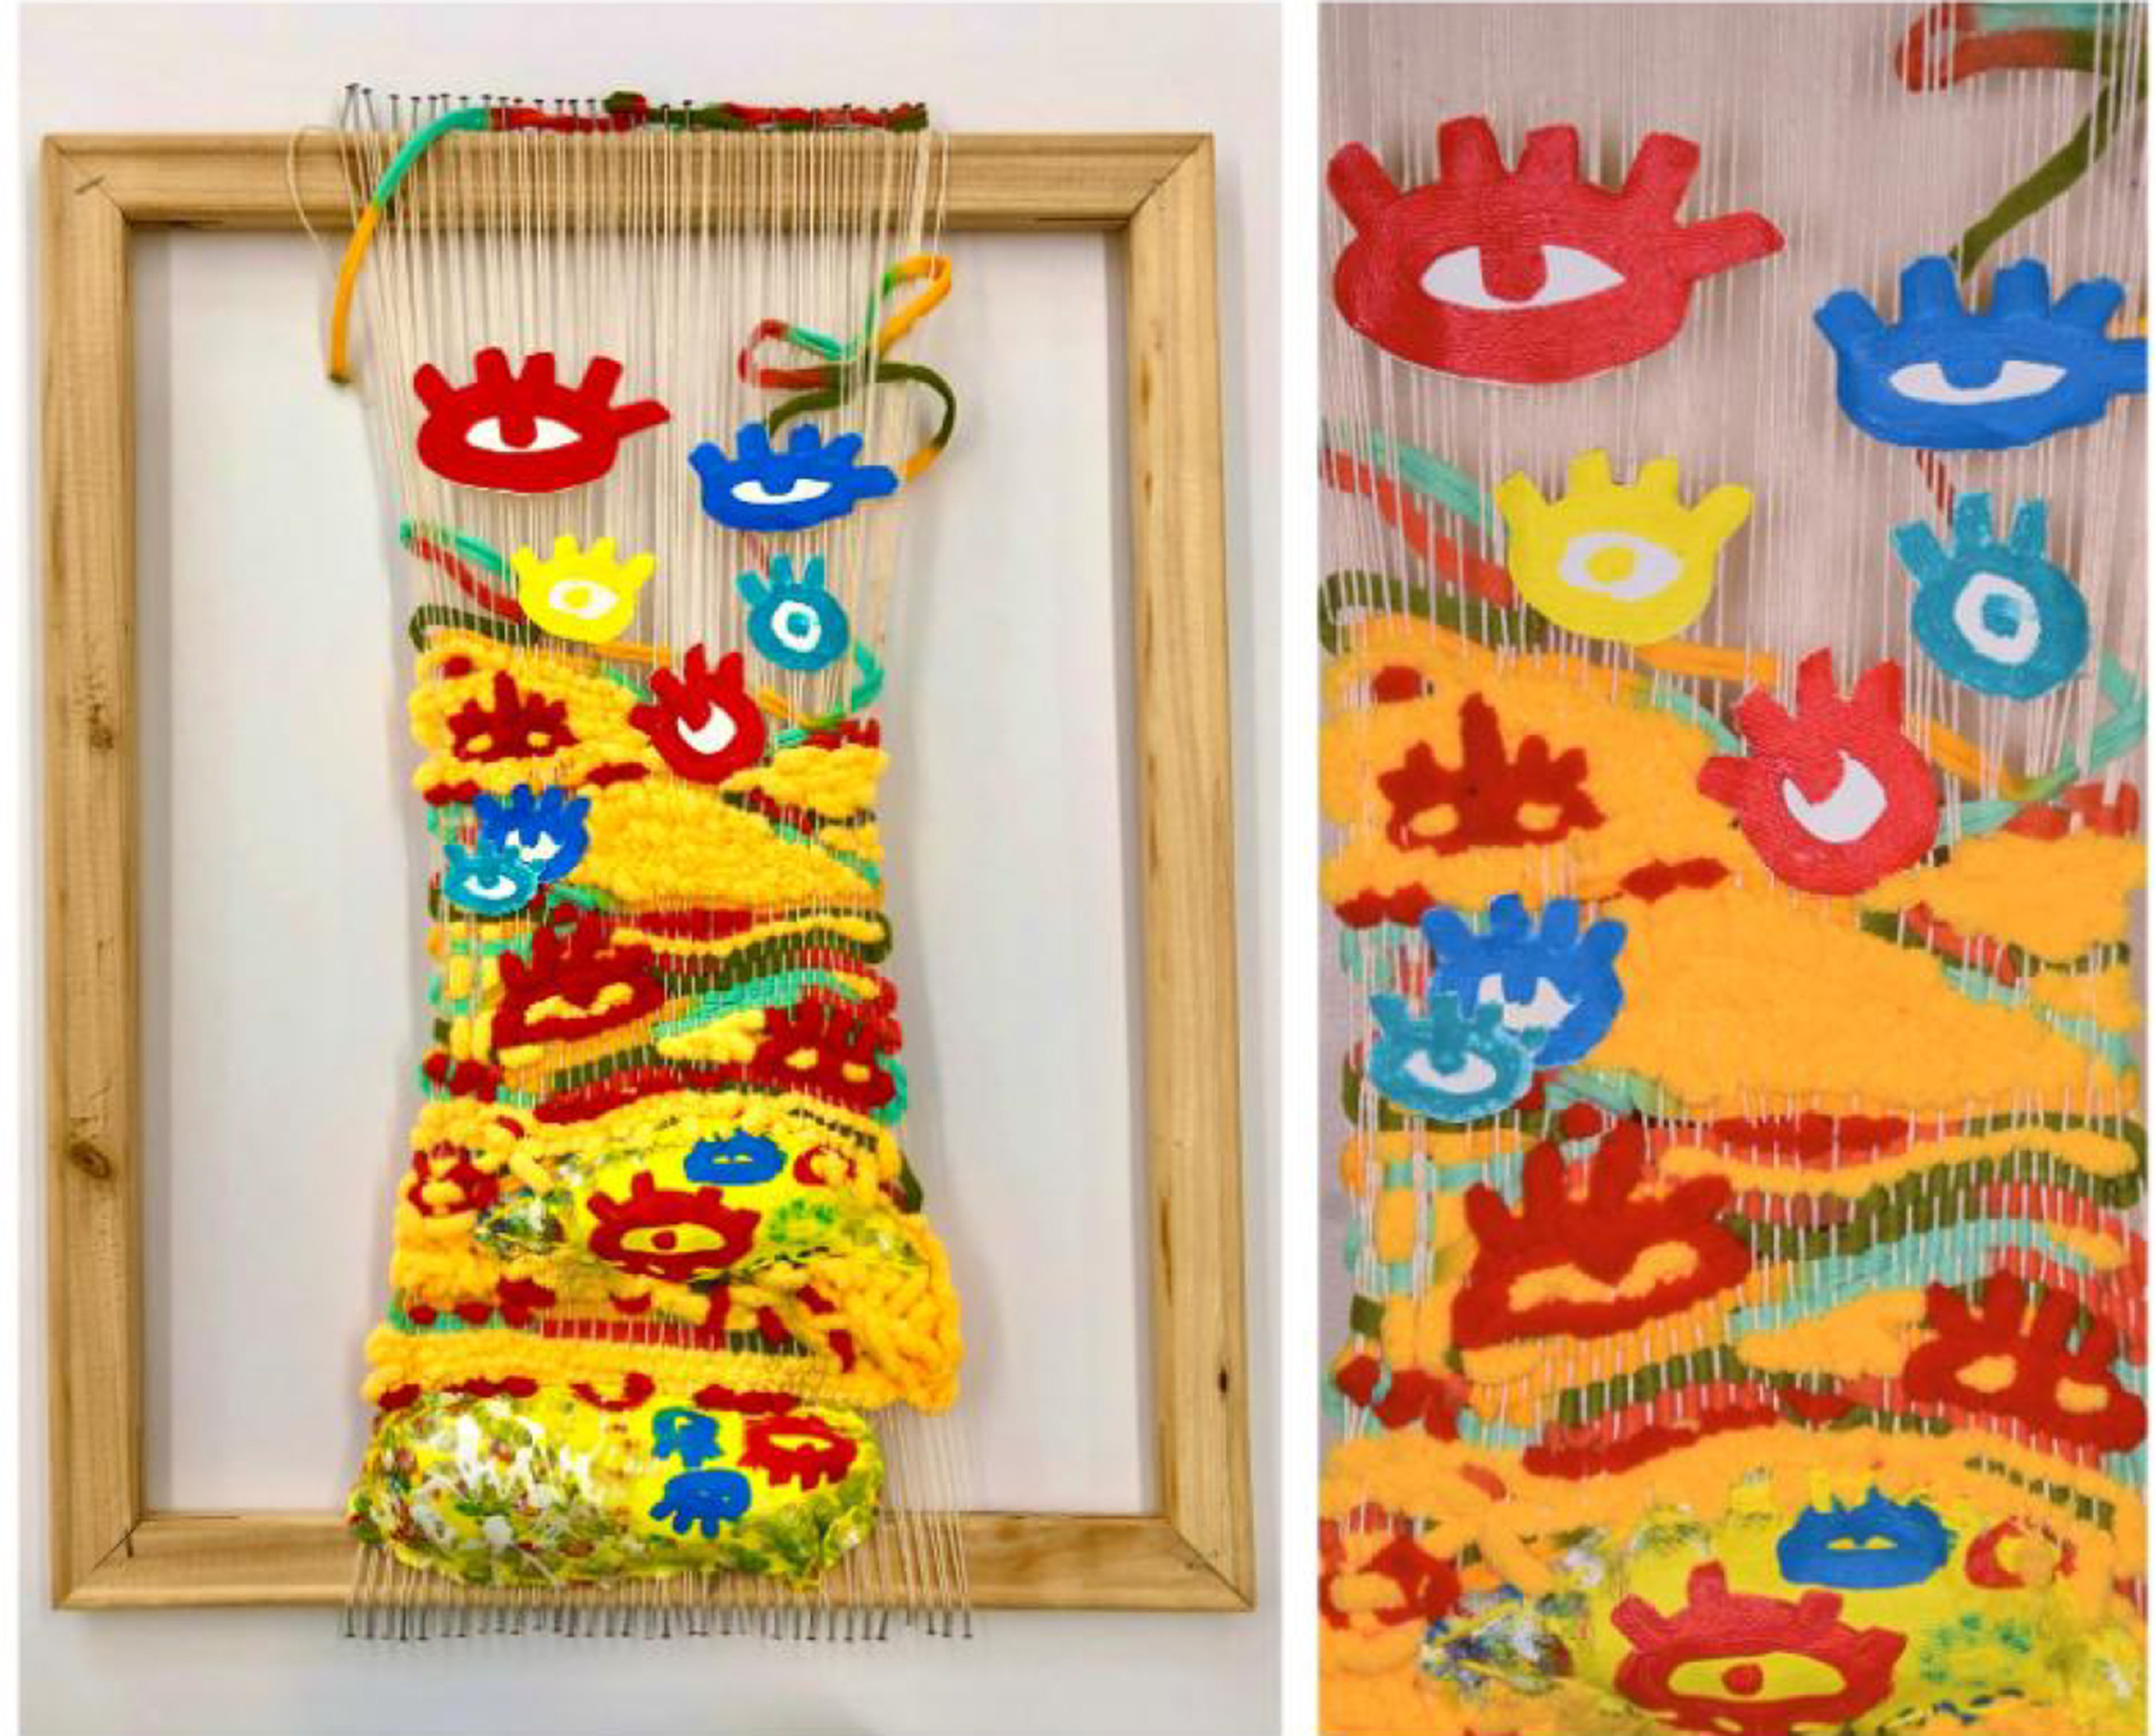 An empty wood picture frame with a fiber art sculpture of yellow fabric and blue and red eye-like items hung in it